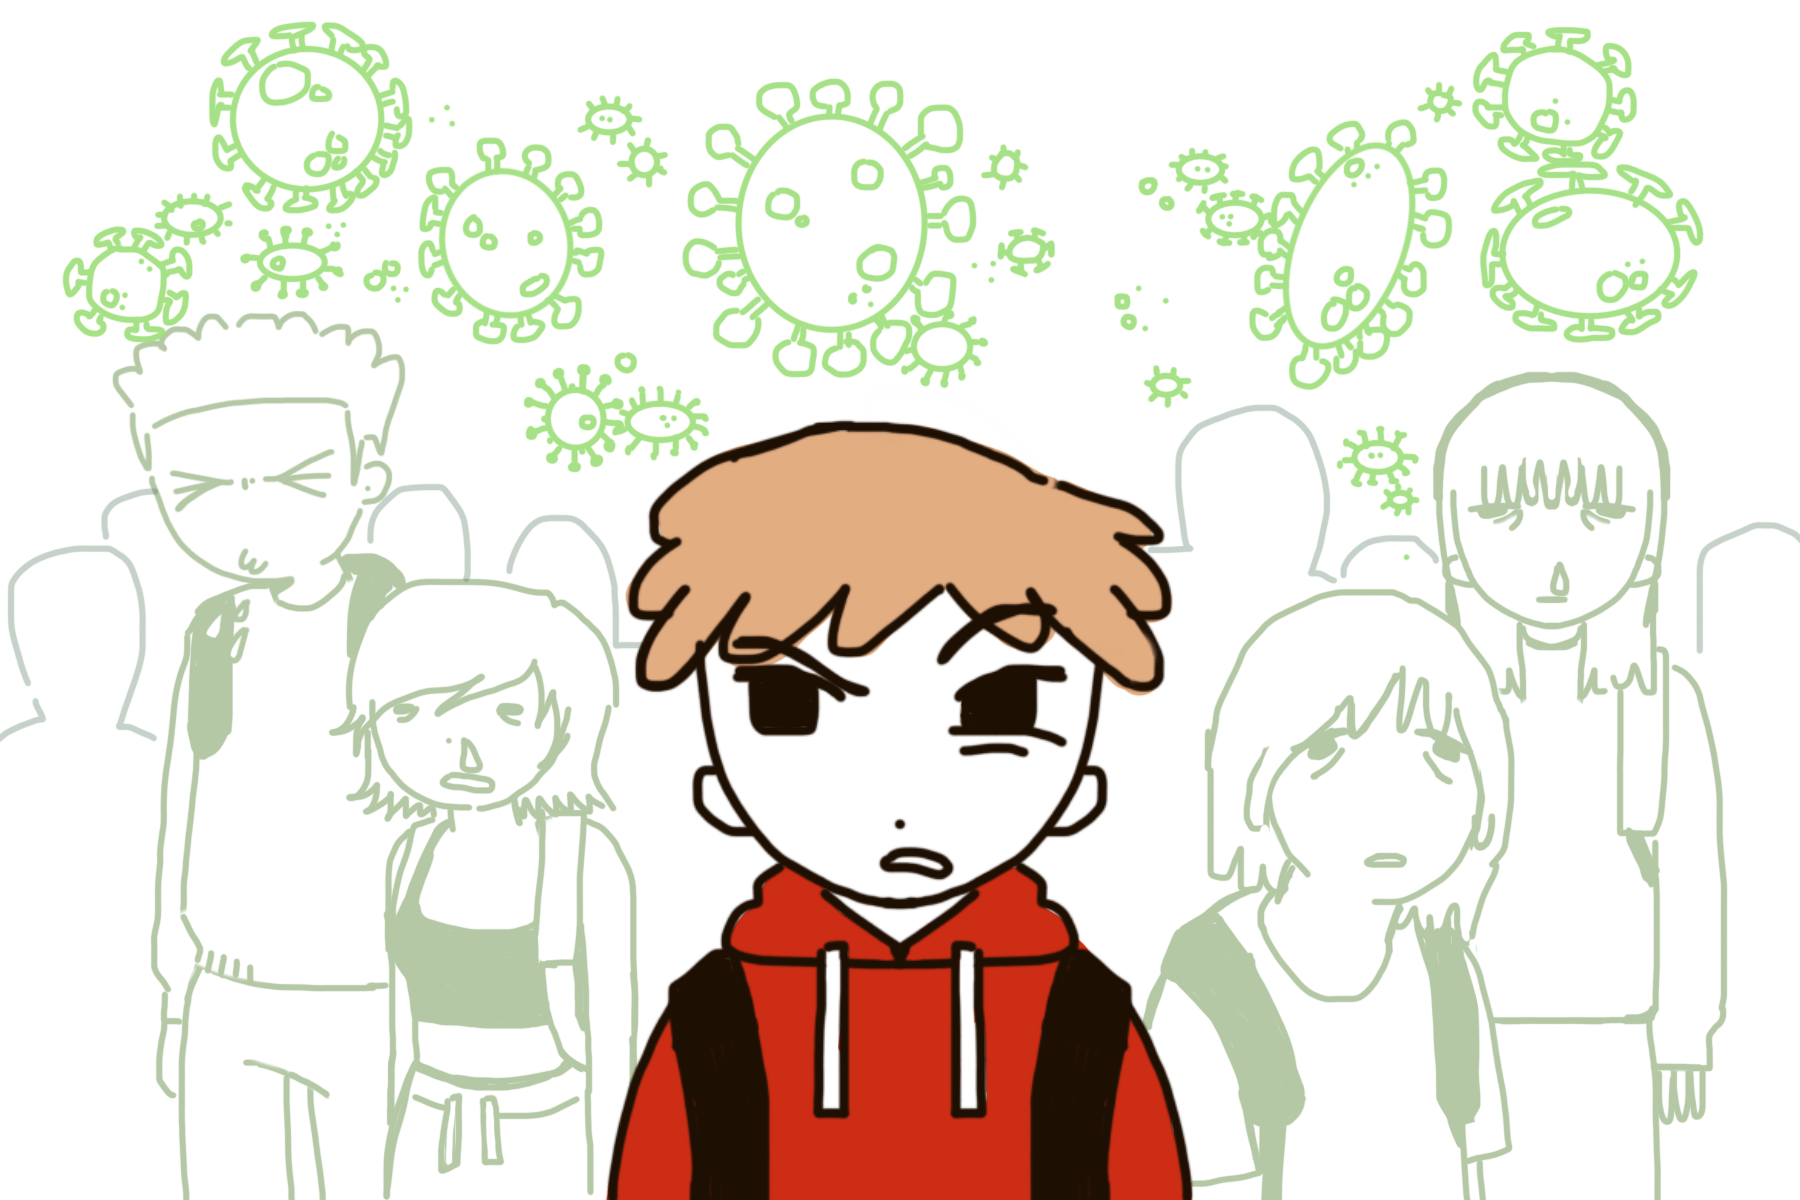 A student stands in a crowded hallway with sick students and germs all around.